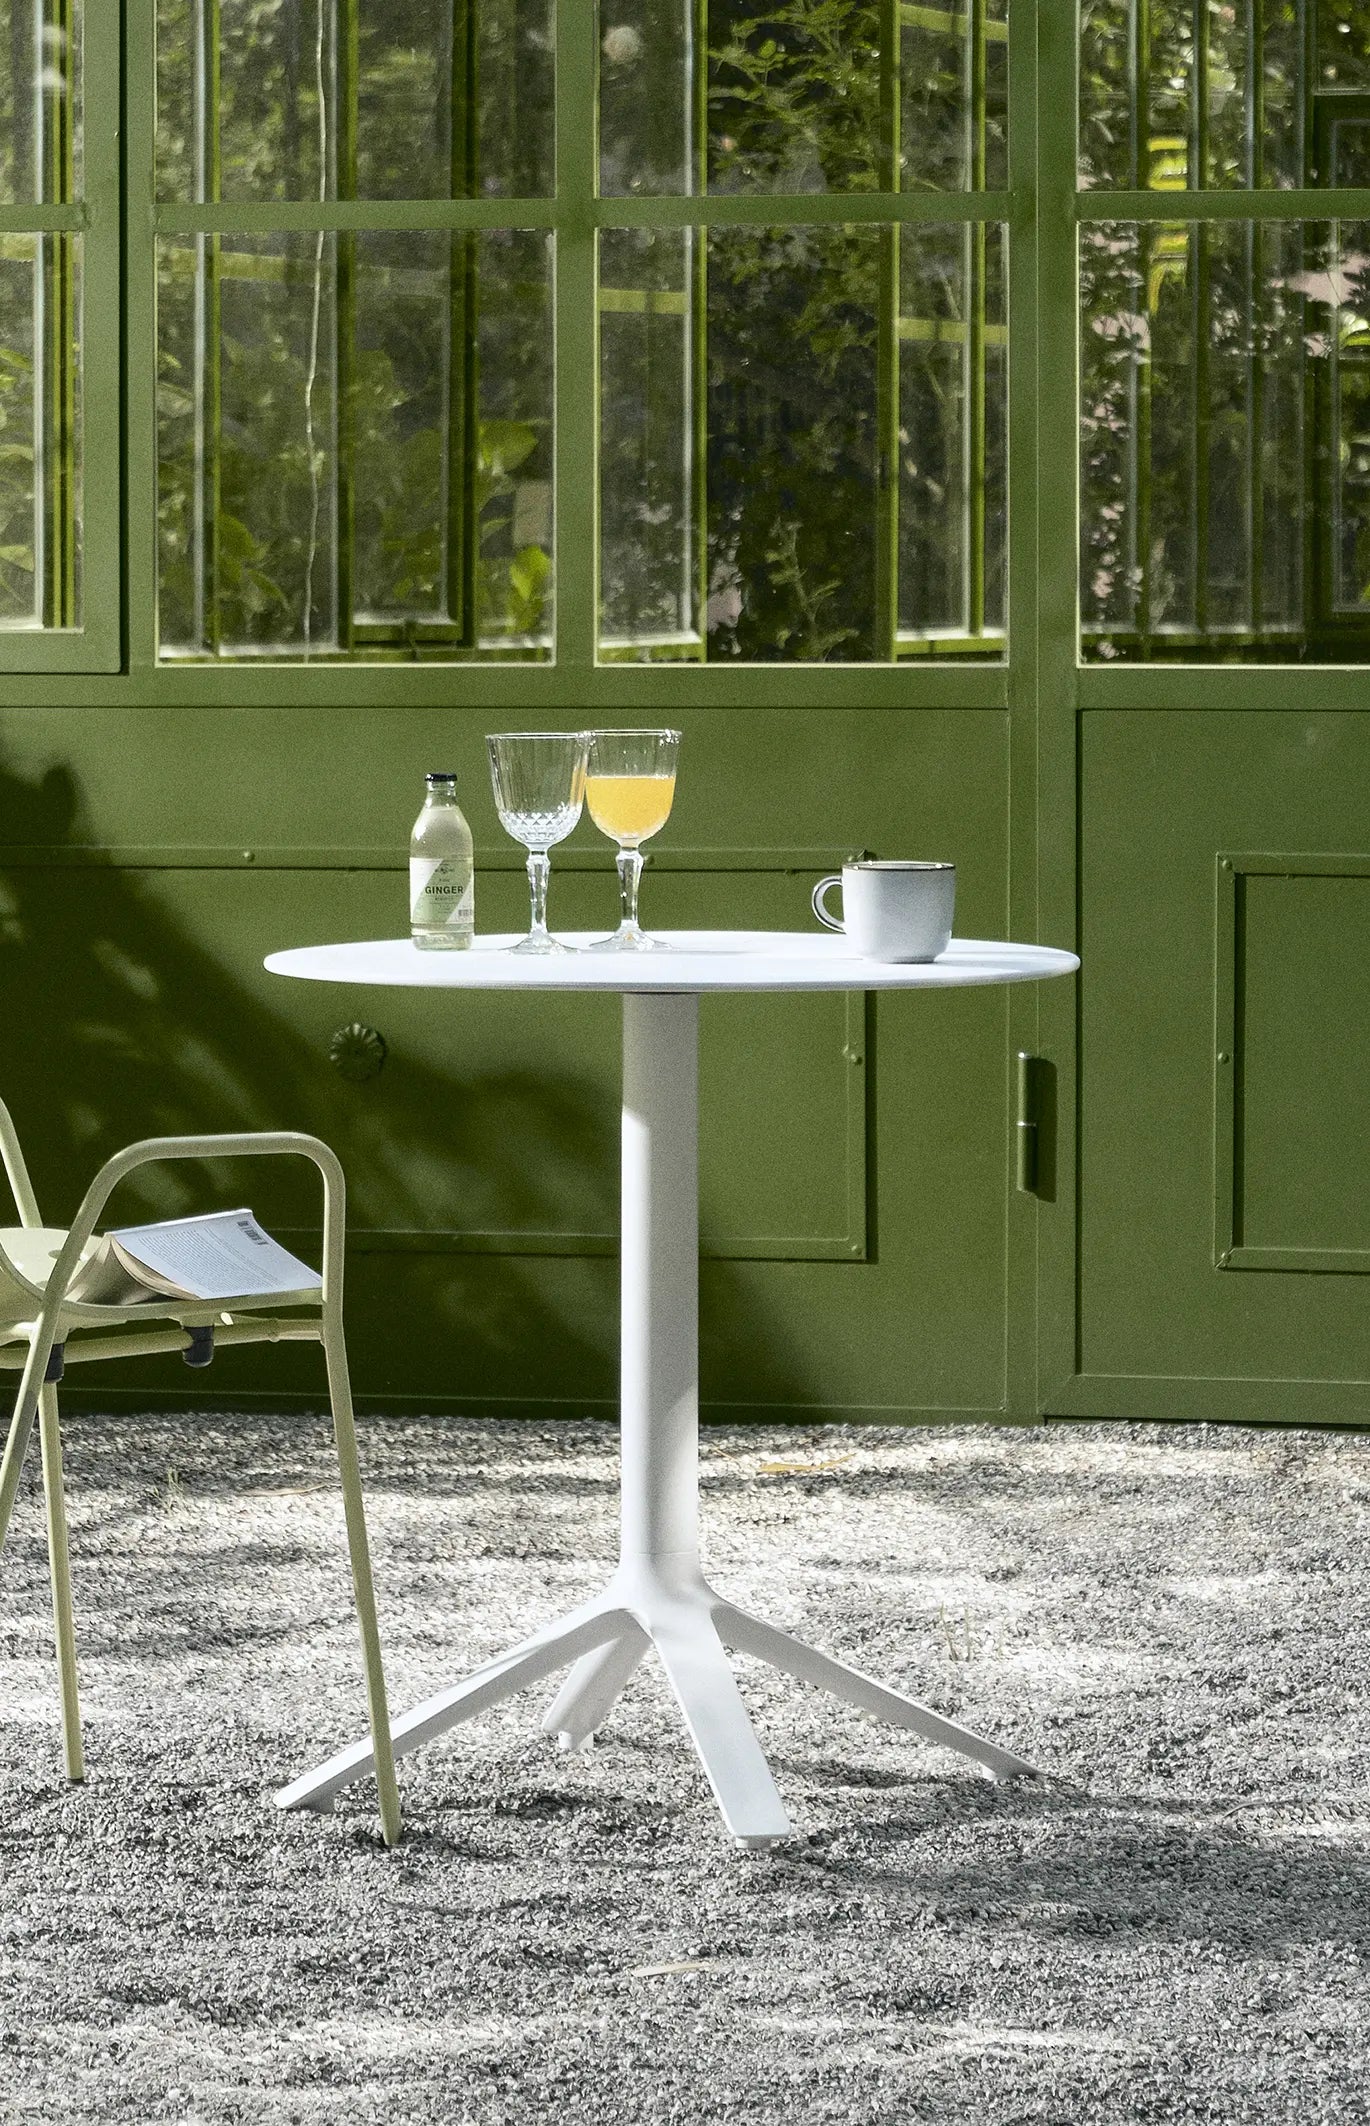 EEX by TOOU: Versatile tables for home or office, in black, white, or gray. Seamless blend of plastic and metal.